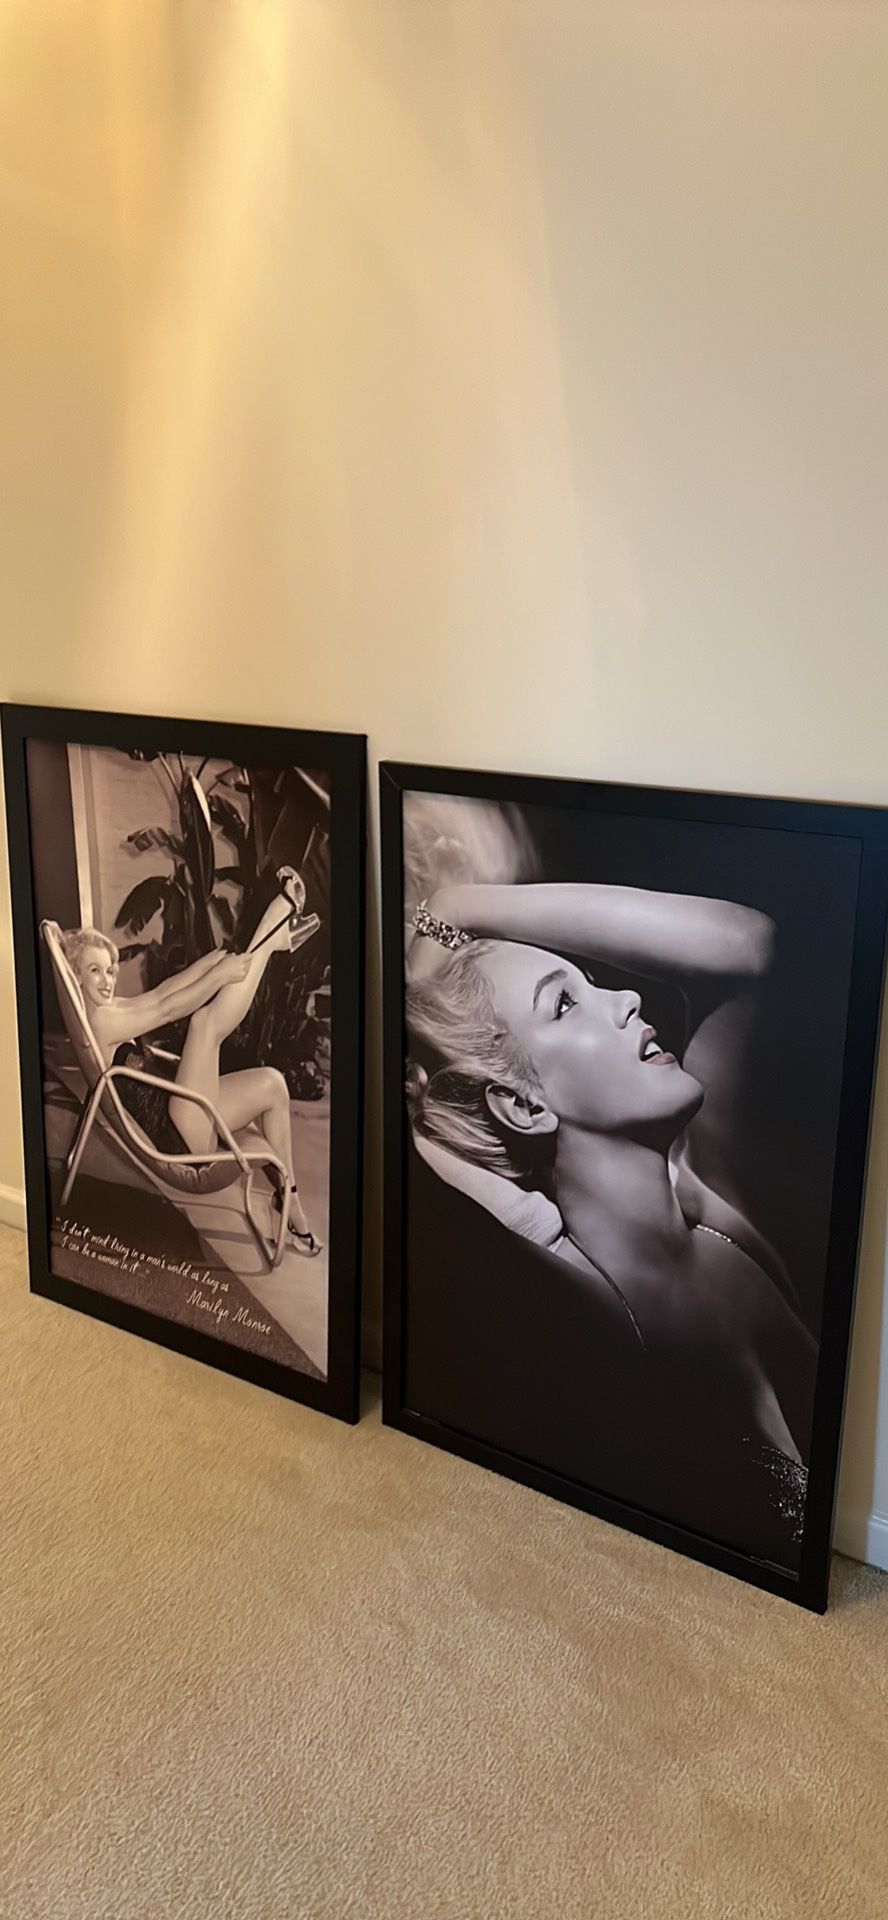 Marilyn Monroe Picture Frames For Sale -$10 Each 